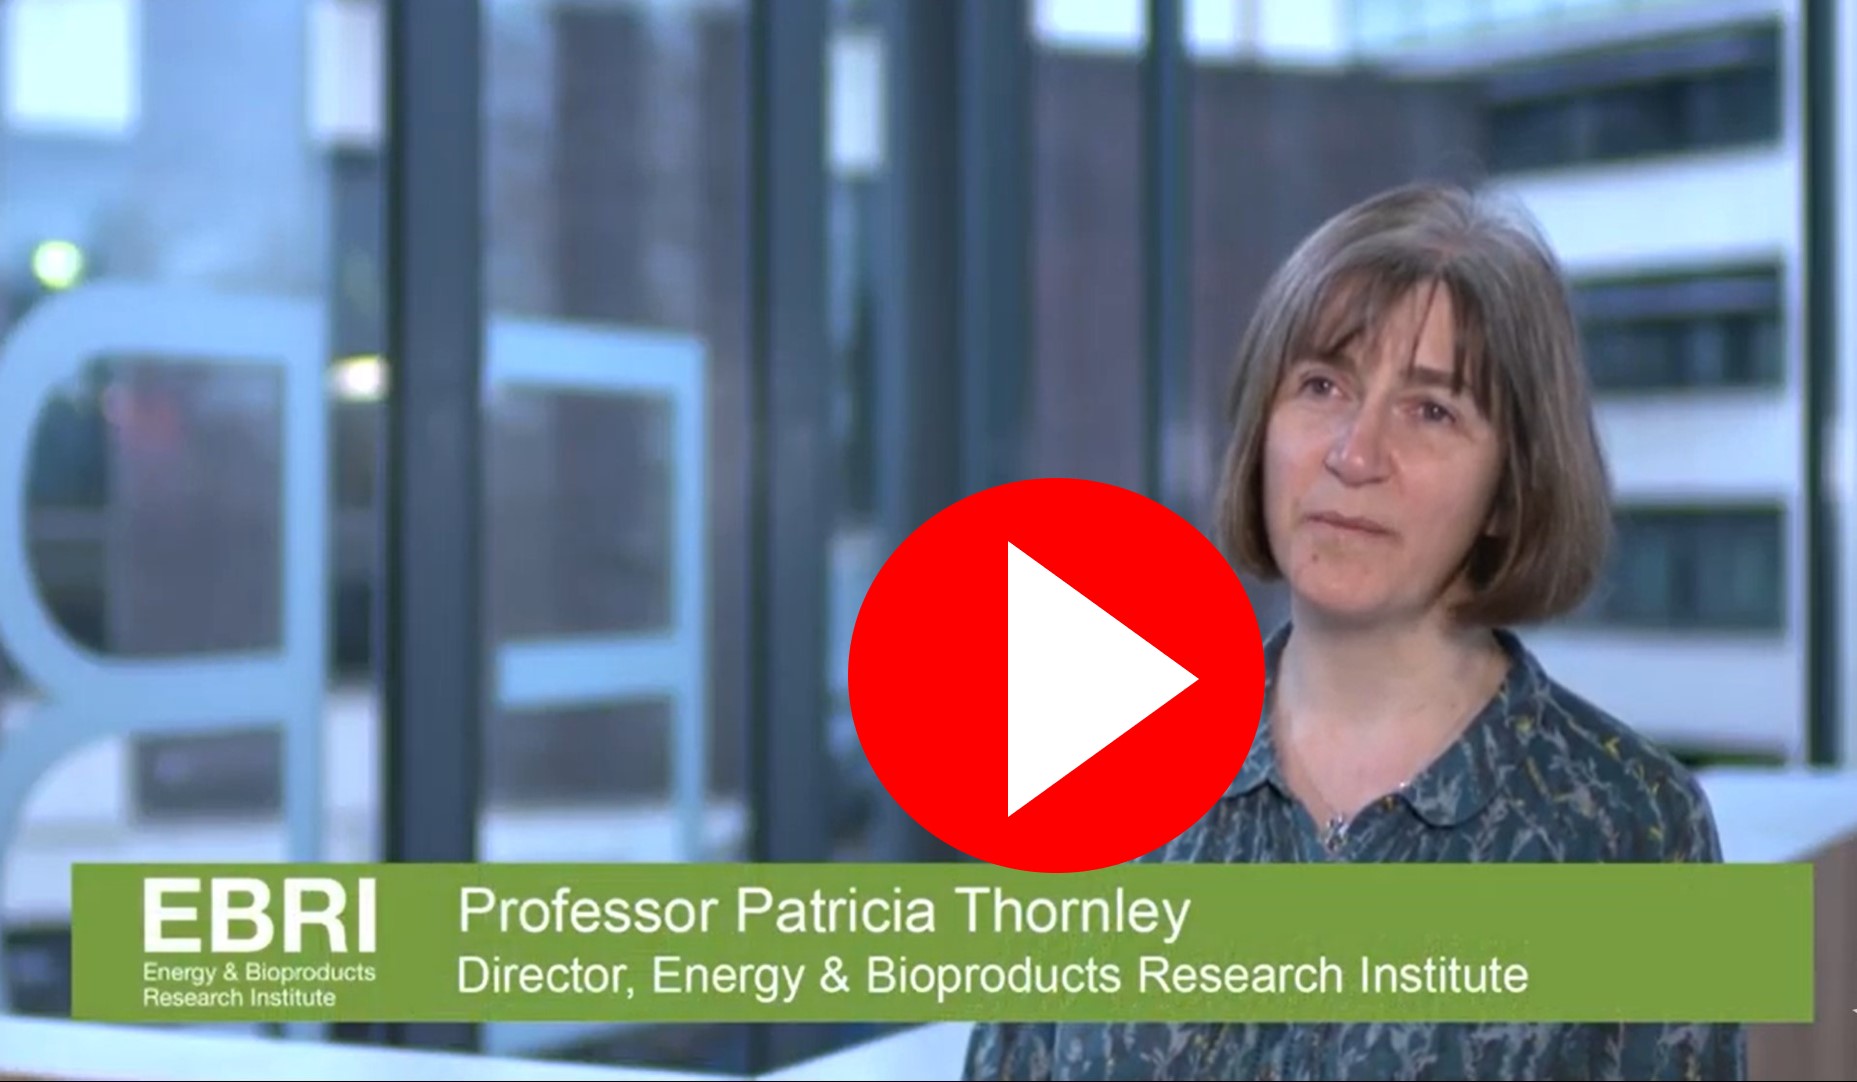 Image of Patricia Thornley, Director of EBRI